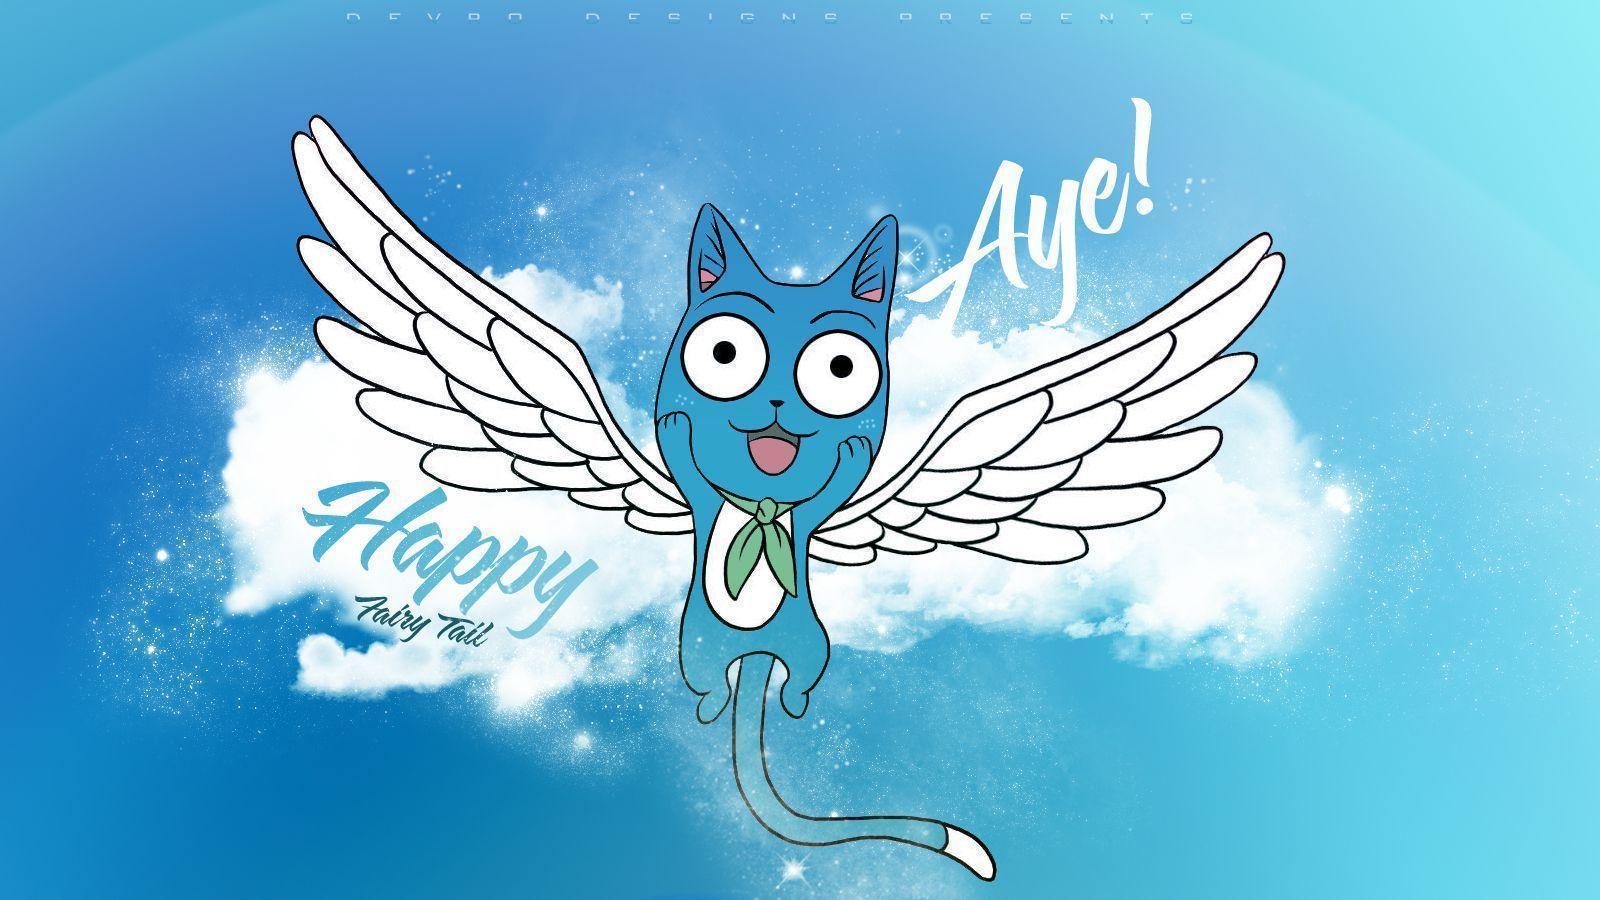 Wallpapers Category HD: Fairy Tail: Happy.